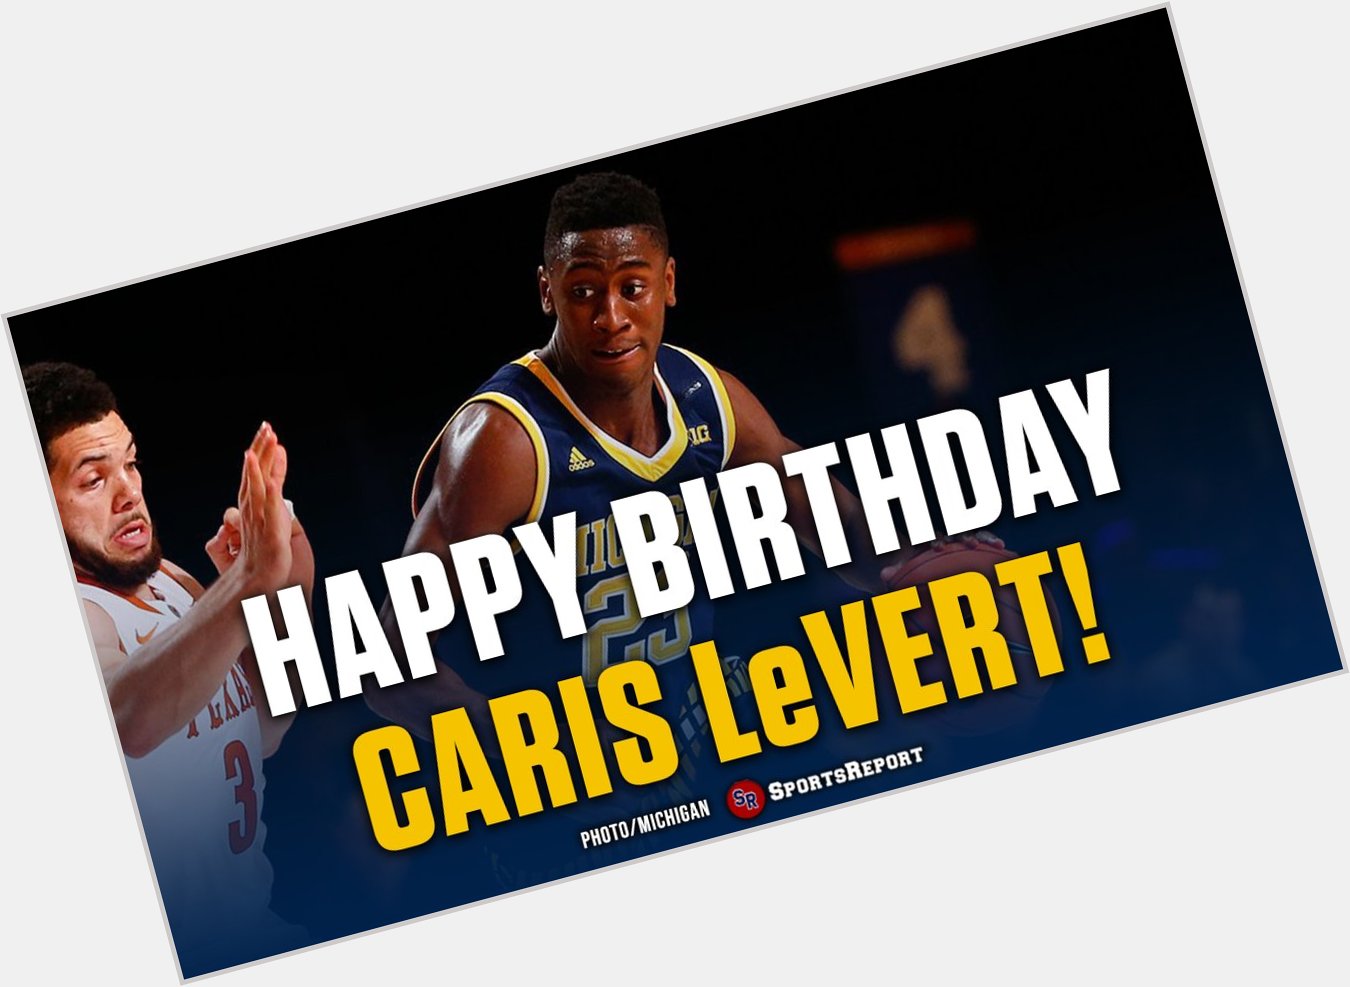  Fans, let\s wish Caris LeVert a Happy Birthday!  